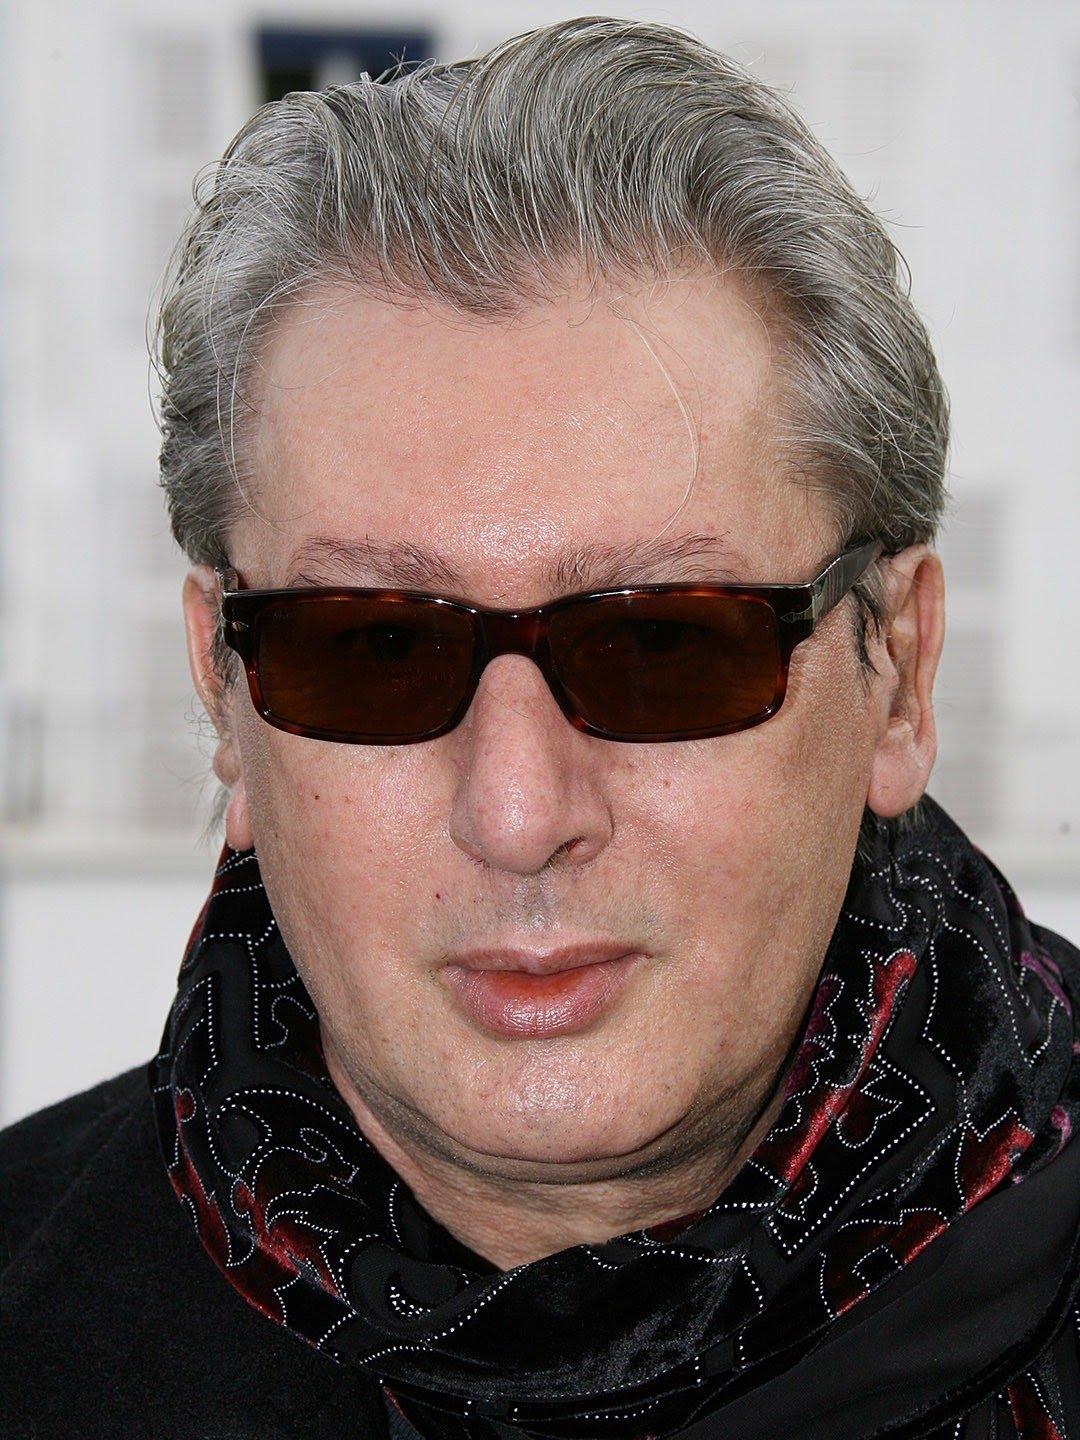 Alain Bashung French Singer, Songwriter, Actor, Composer